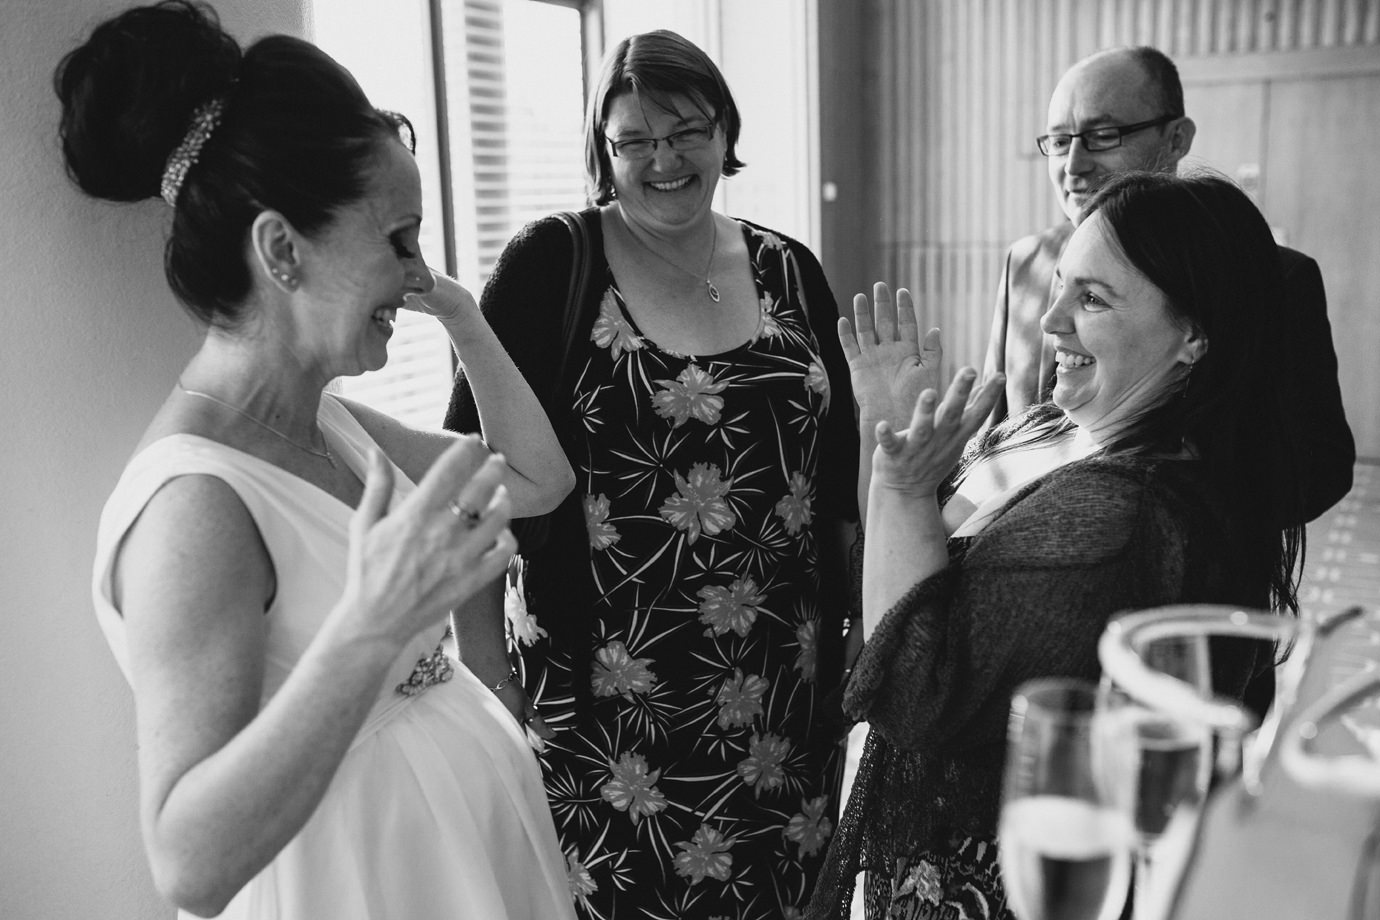 Bride meeting family and friends, candid wedding photography, London